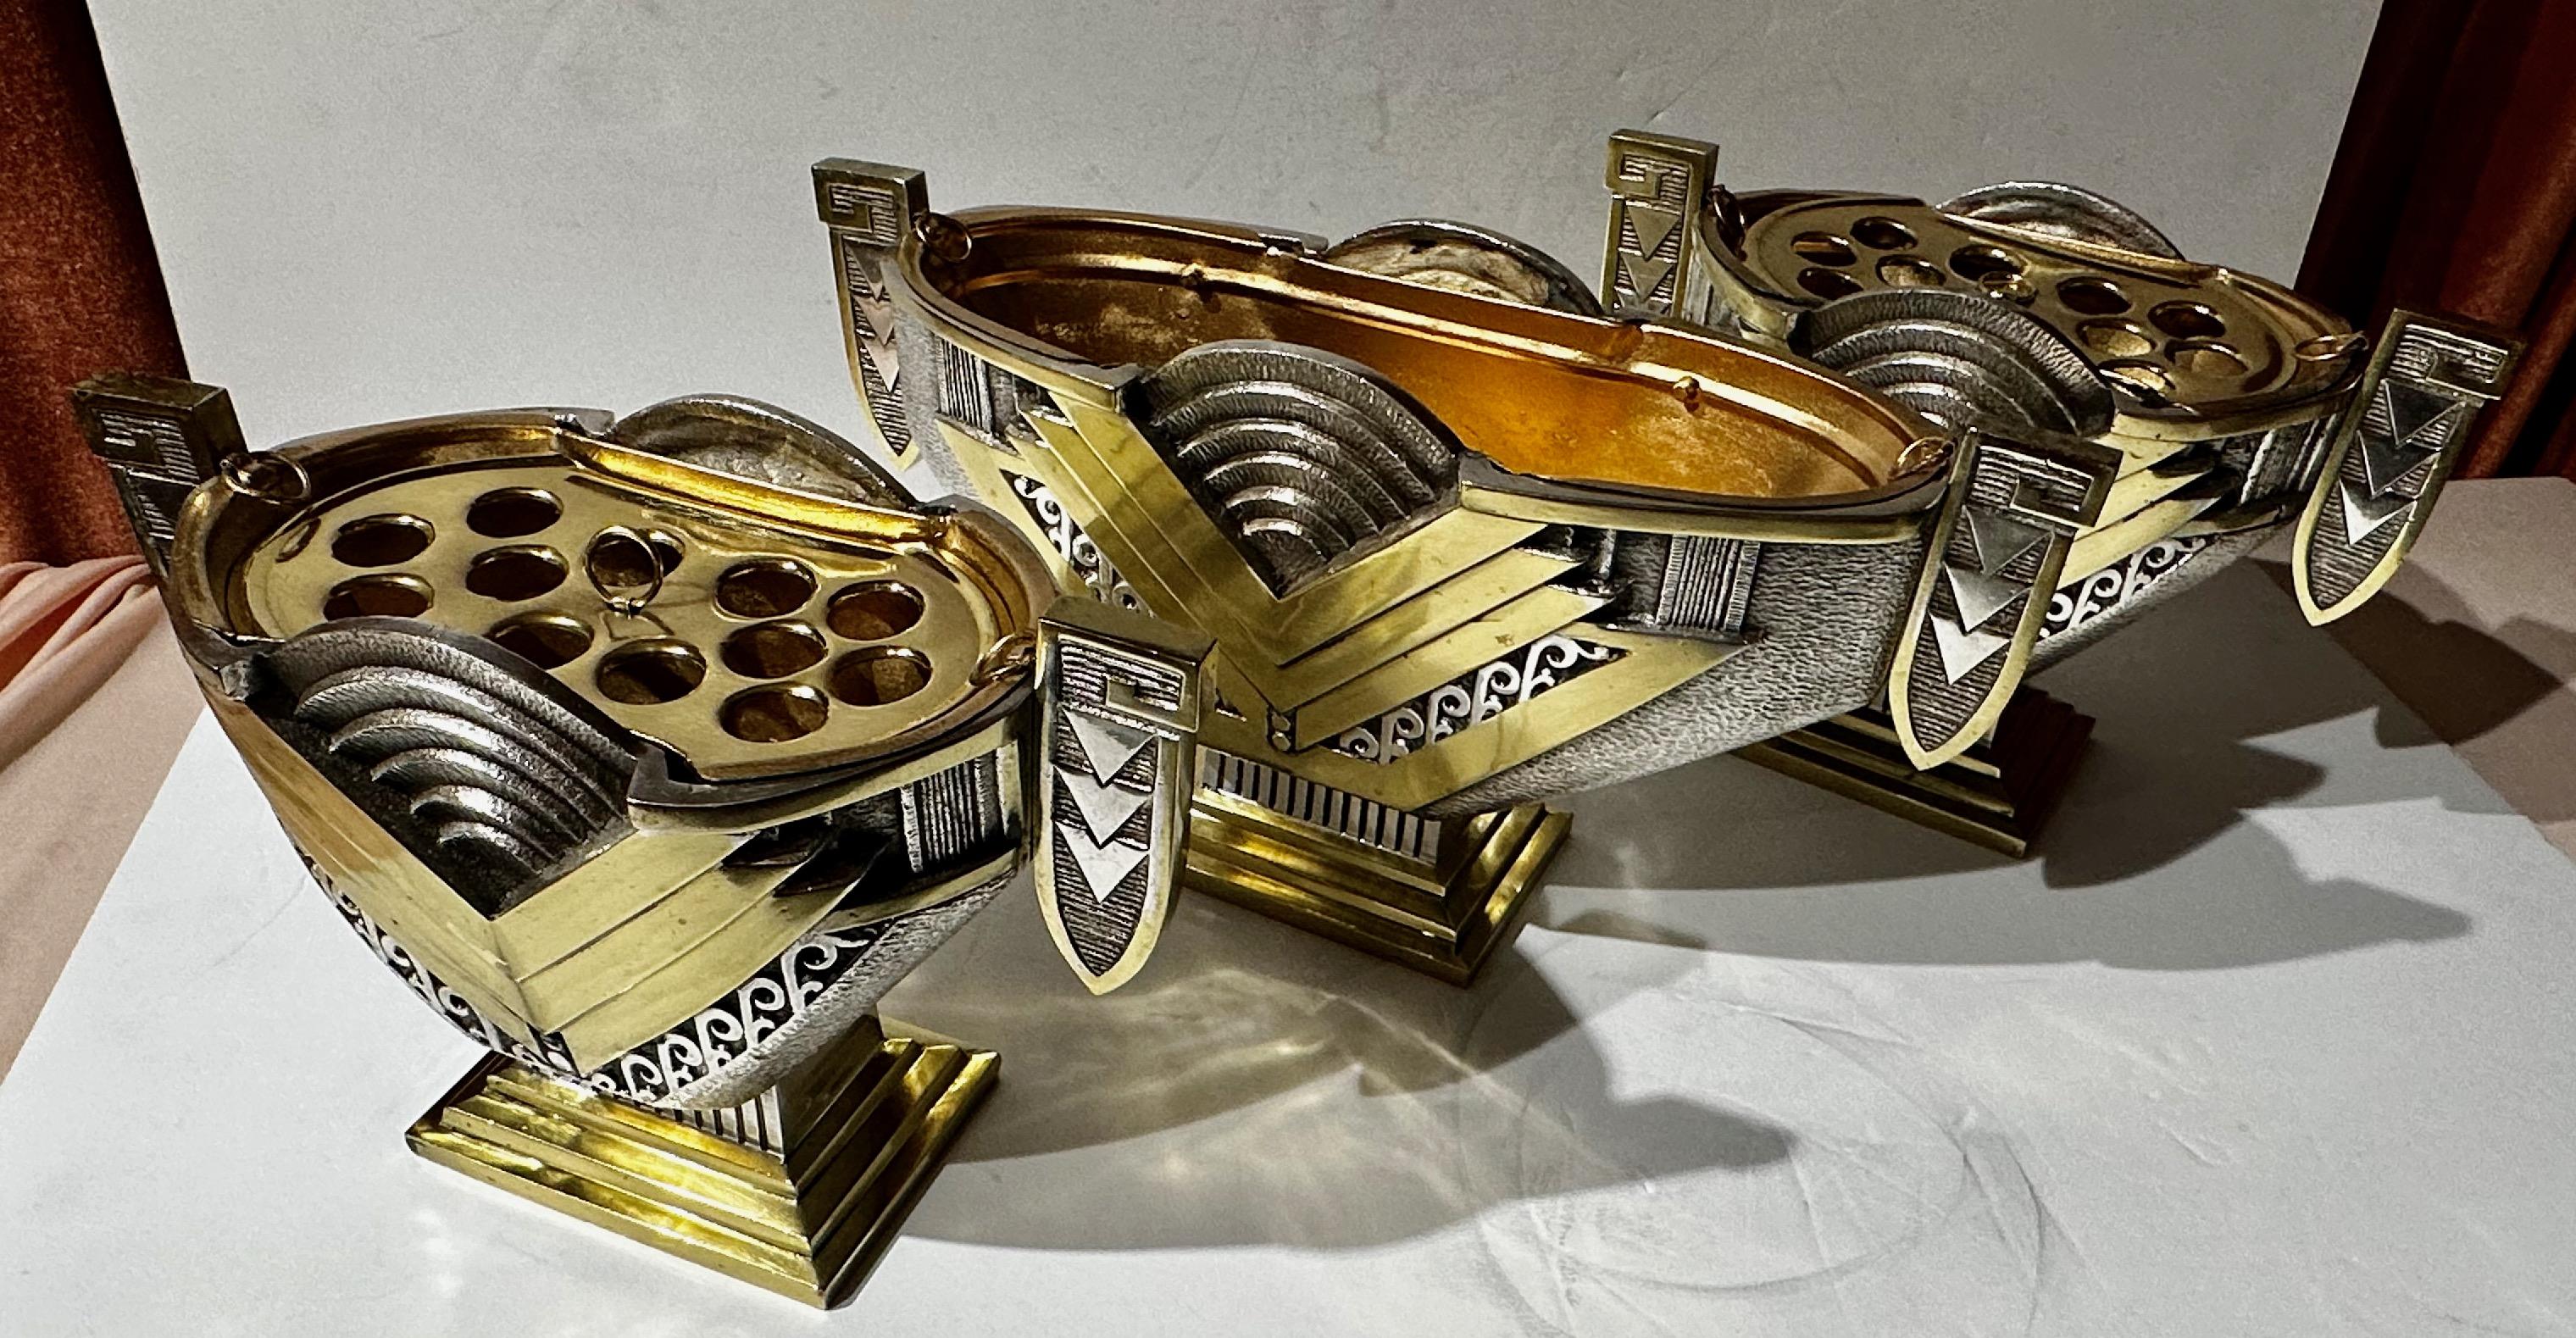 Art Deco Modernist Silver and Brass Jardiniere Three Piece Set This set represent exceptional examples of the decorative arts during the Art Deco era. Using bronze, silver plating, and gilded ornamentation all contribute to its luxurious and stylish